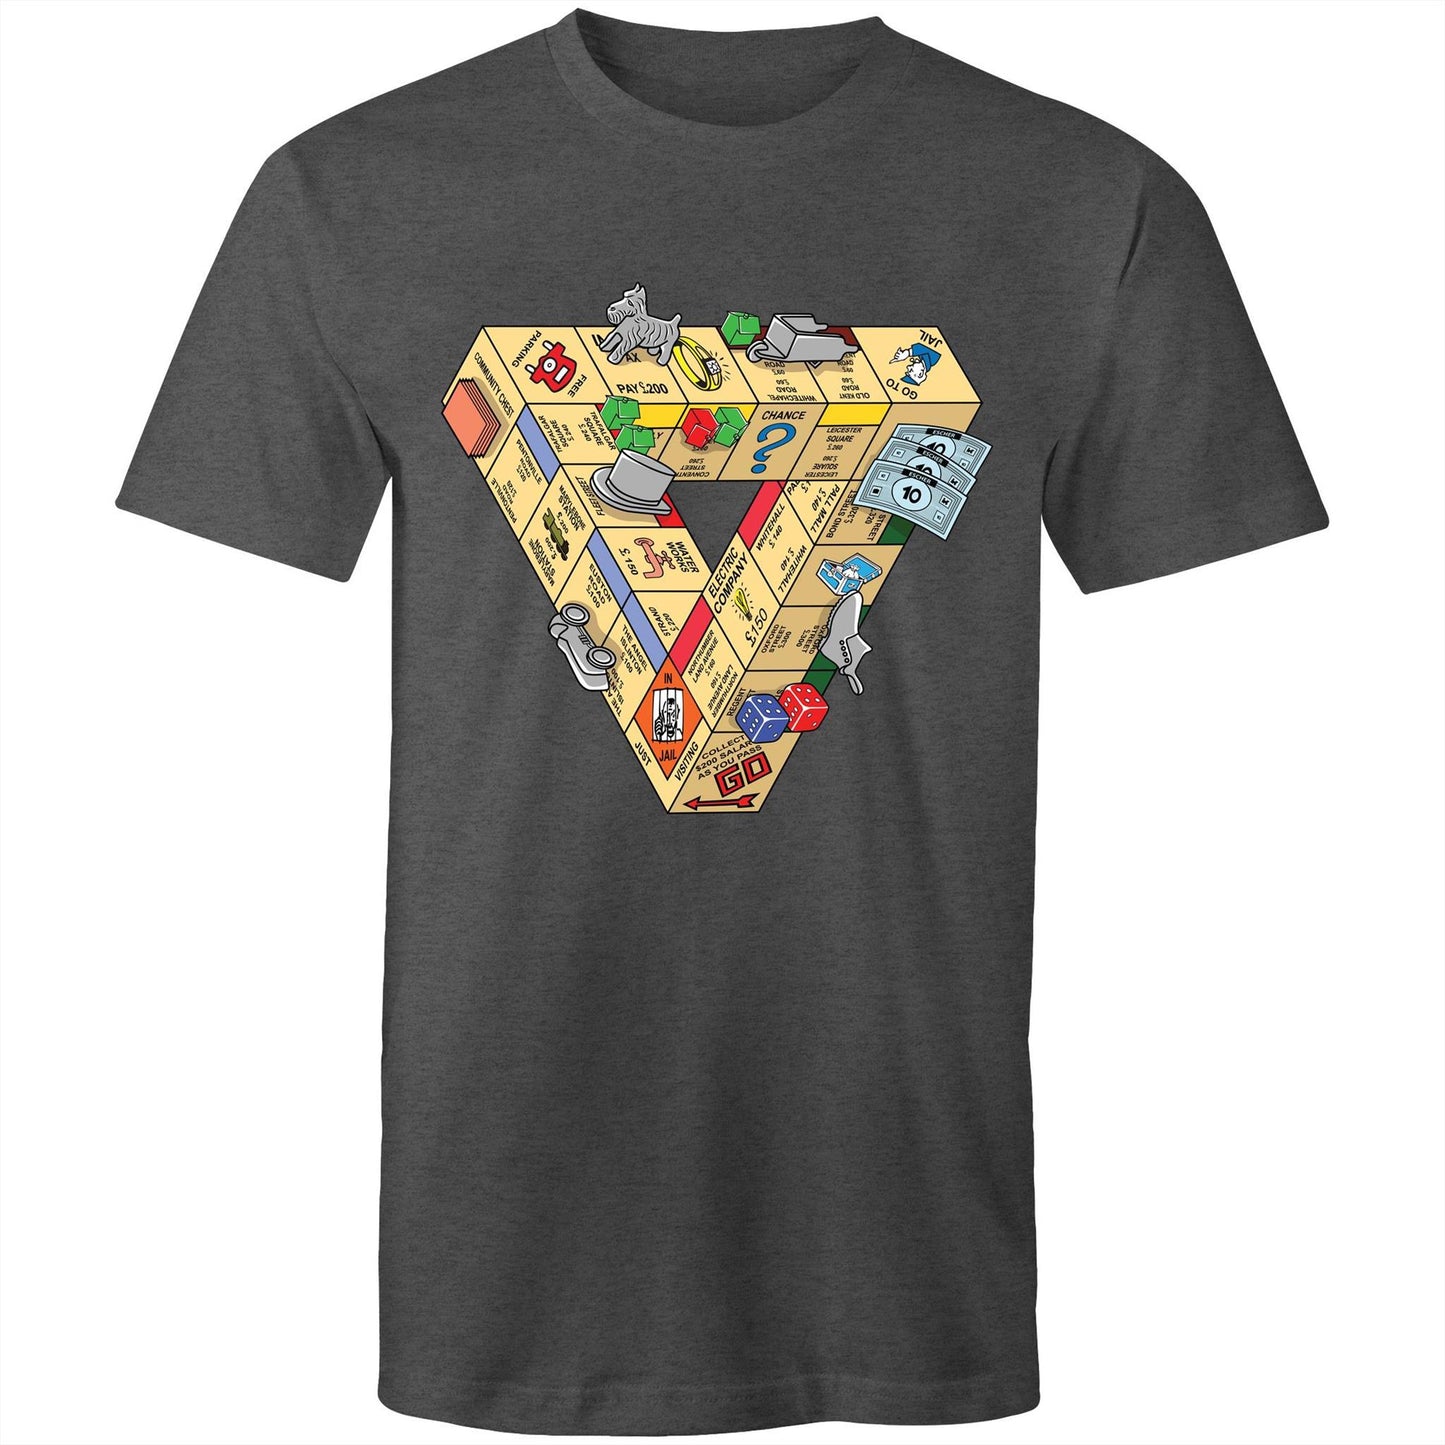 The Impossible Board Game - Men's T-Shirt